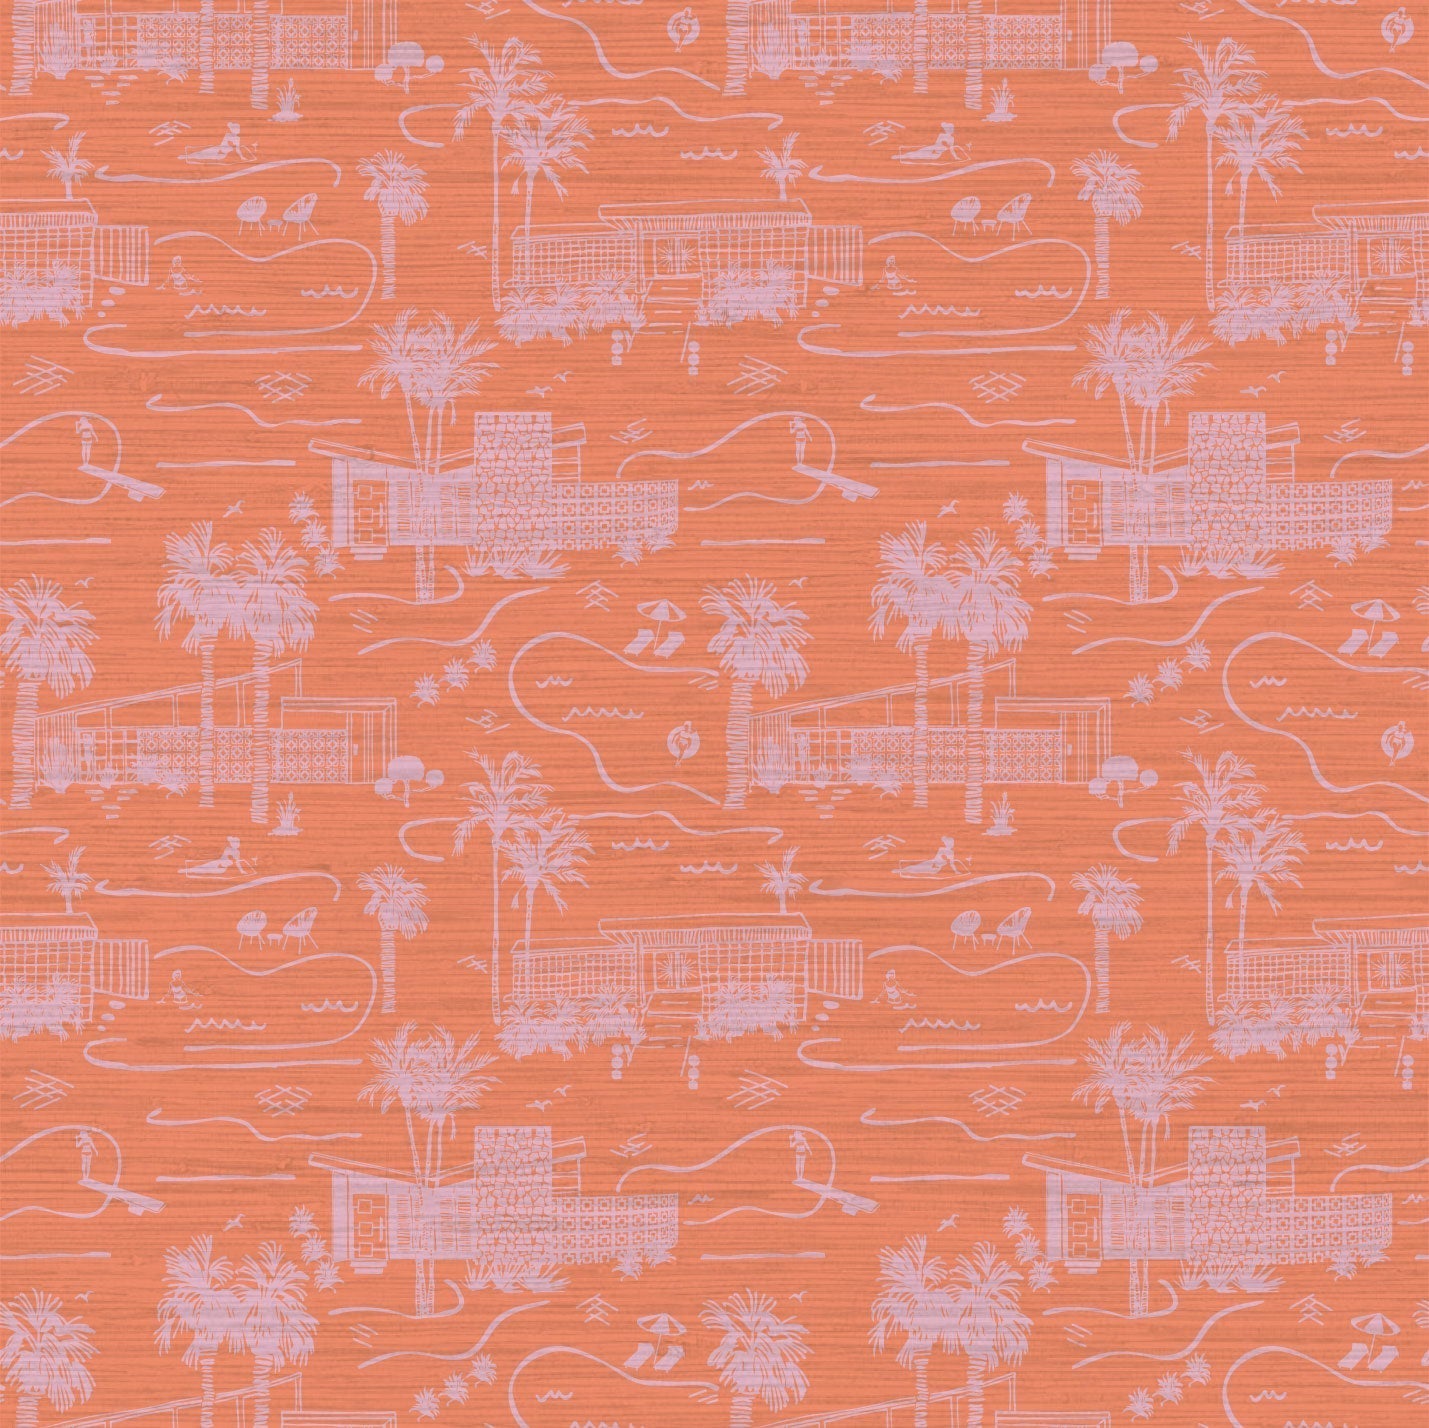 grasscloth toile printed wallpaper with mid century modern houses inspired by palm springs featuring swimming pools, palm trees and secret suntanning ladies in this hand drawn one color printed design with coral base and light pink print